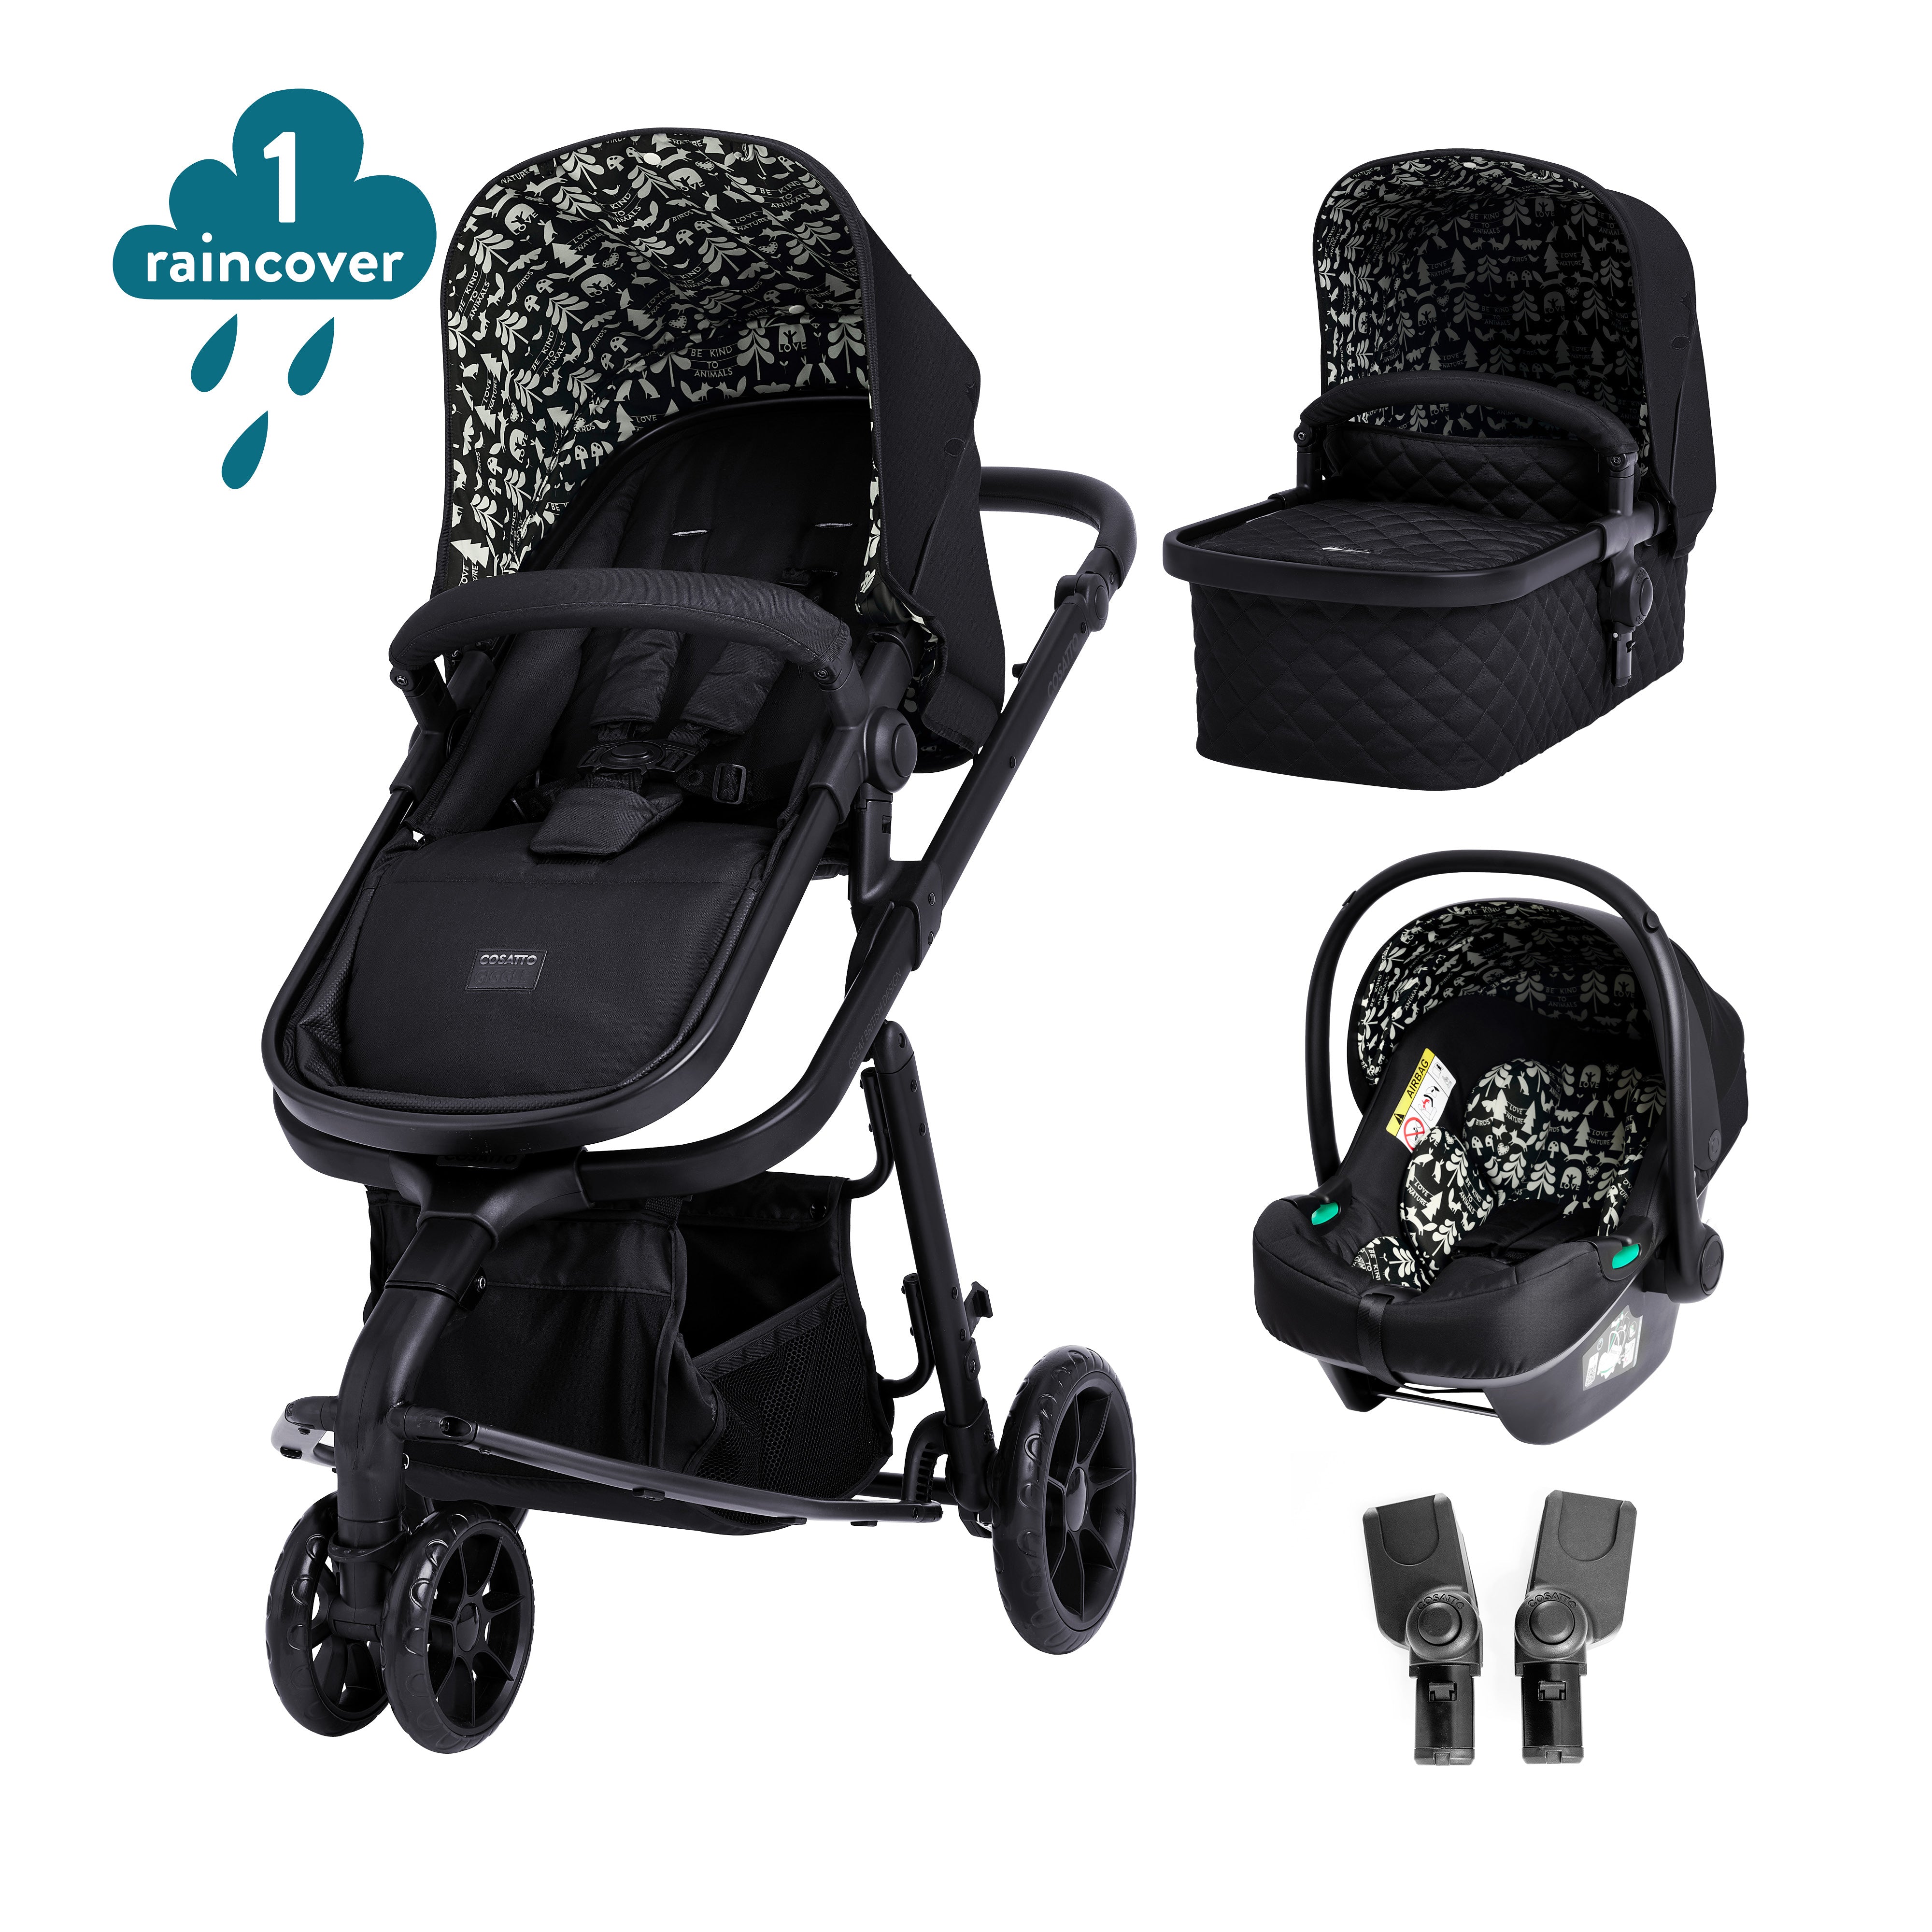 Giggle 3 in 1 Carseat Bundle Silhouette